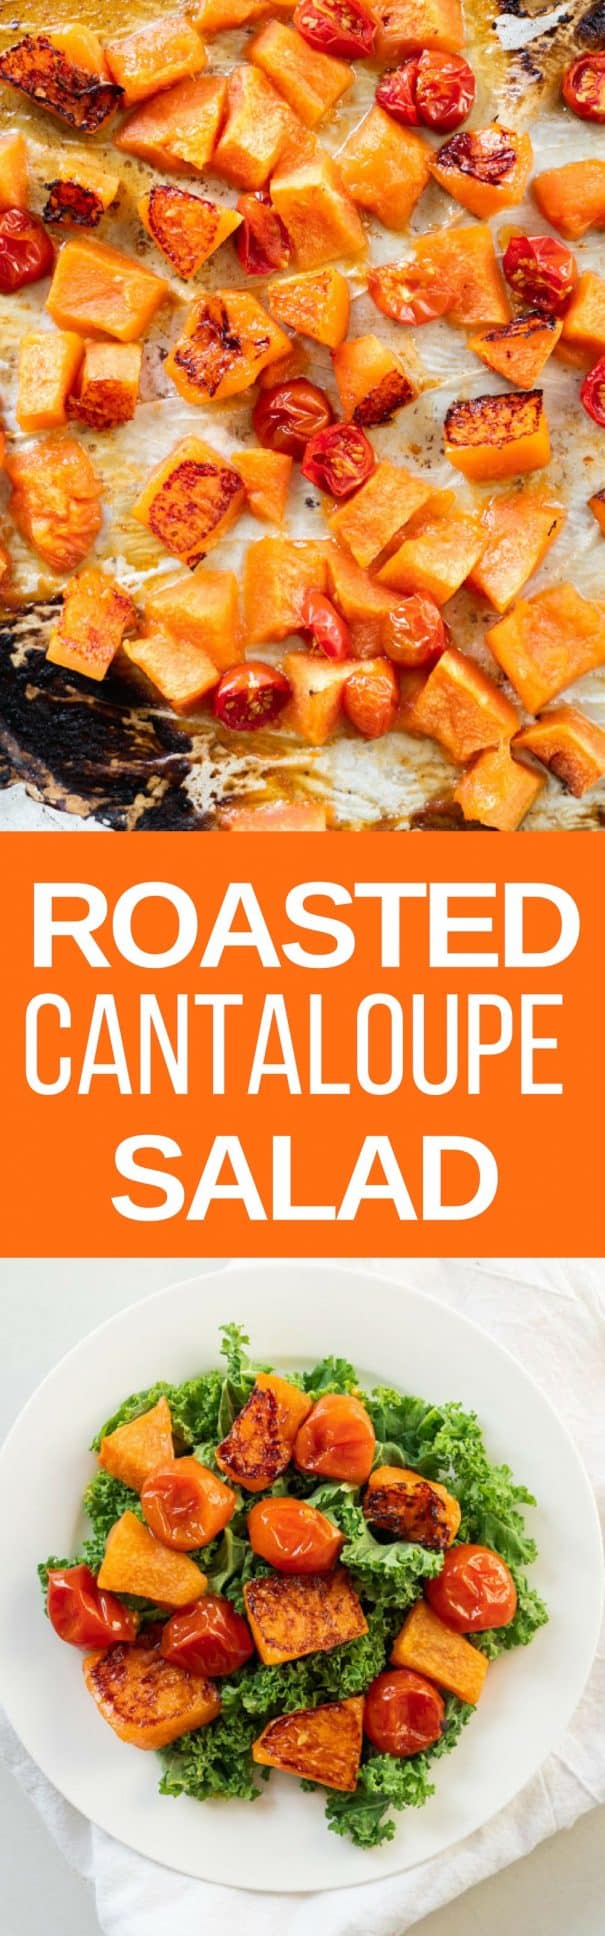 Healthy Roasted Cantaloupe Salad recipe made in 30 minutes.  It's an easy savory and sweet melon tomato salad! I love this recipe for our garden Summer fruit!  This salad is vegetarian, vegan and gluten free.